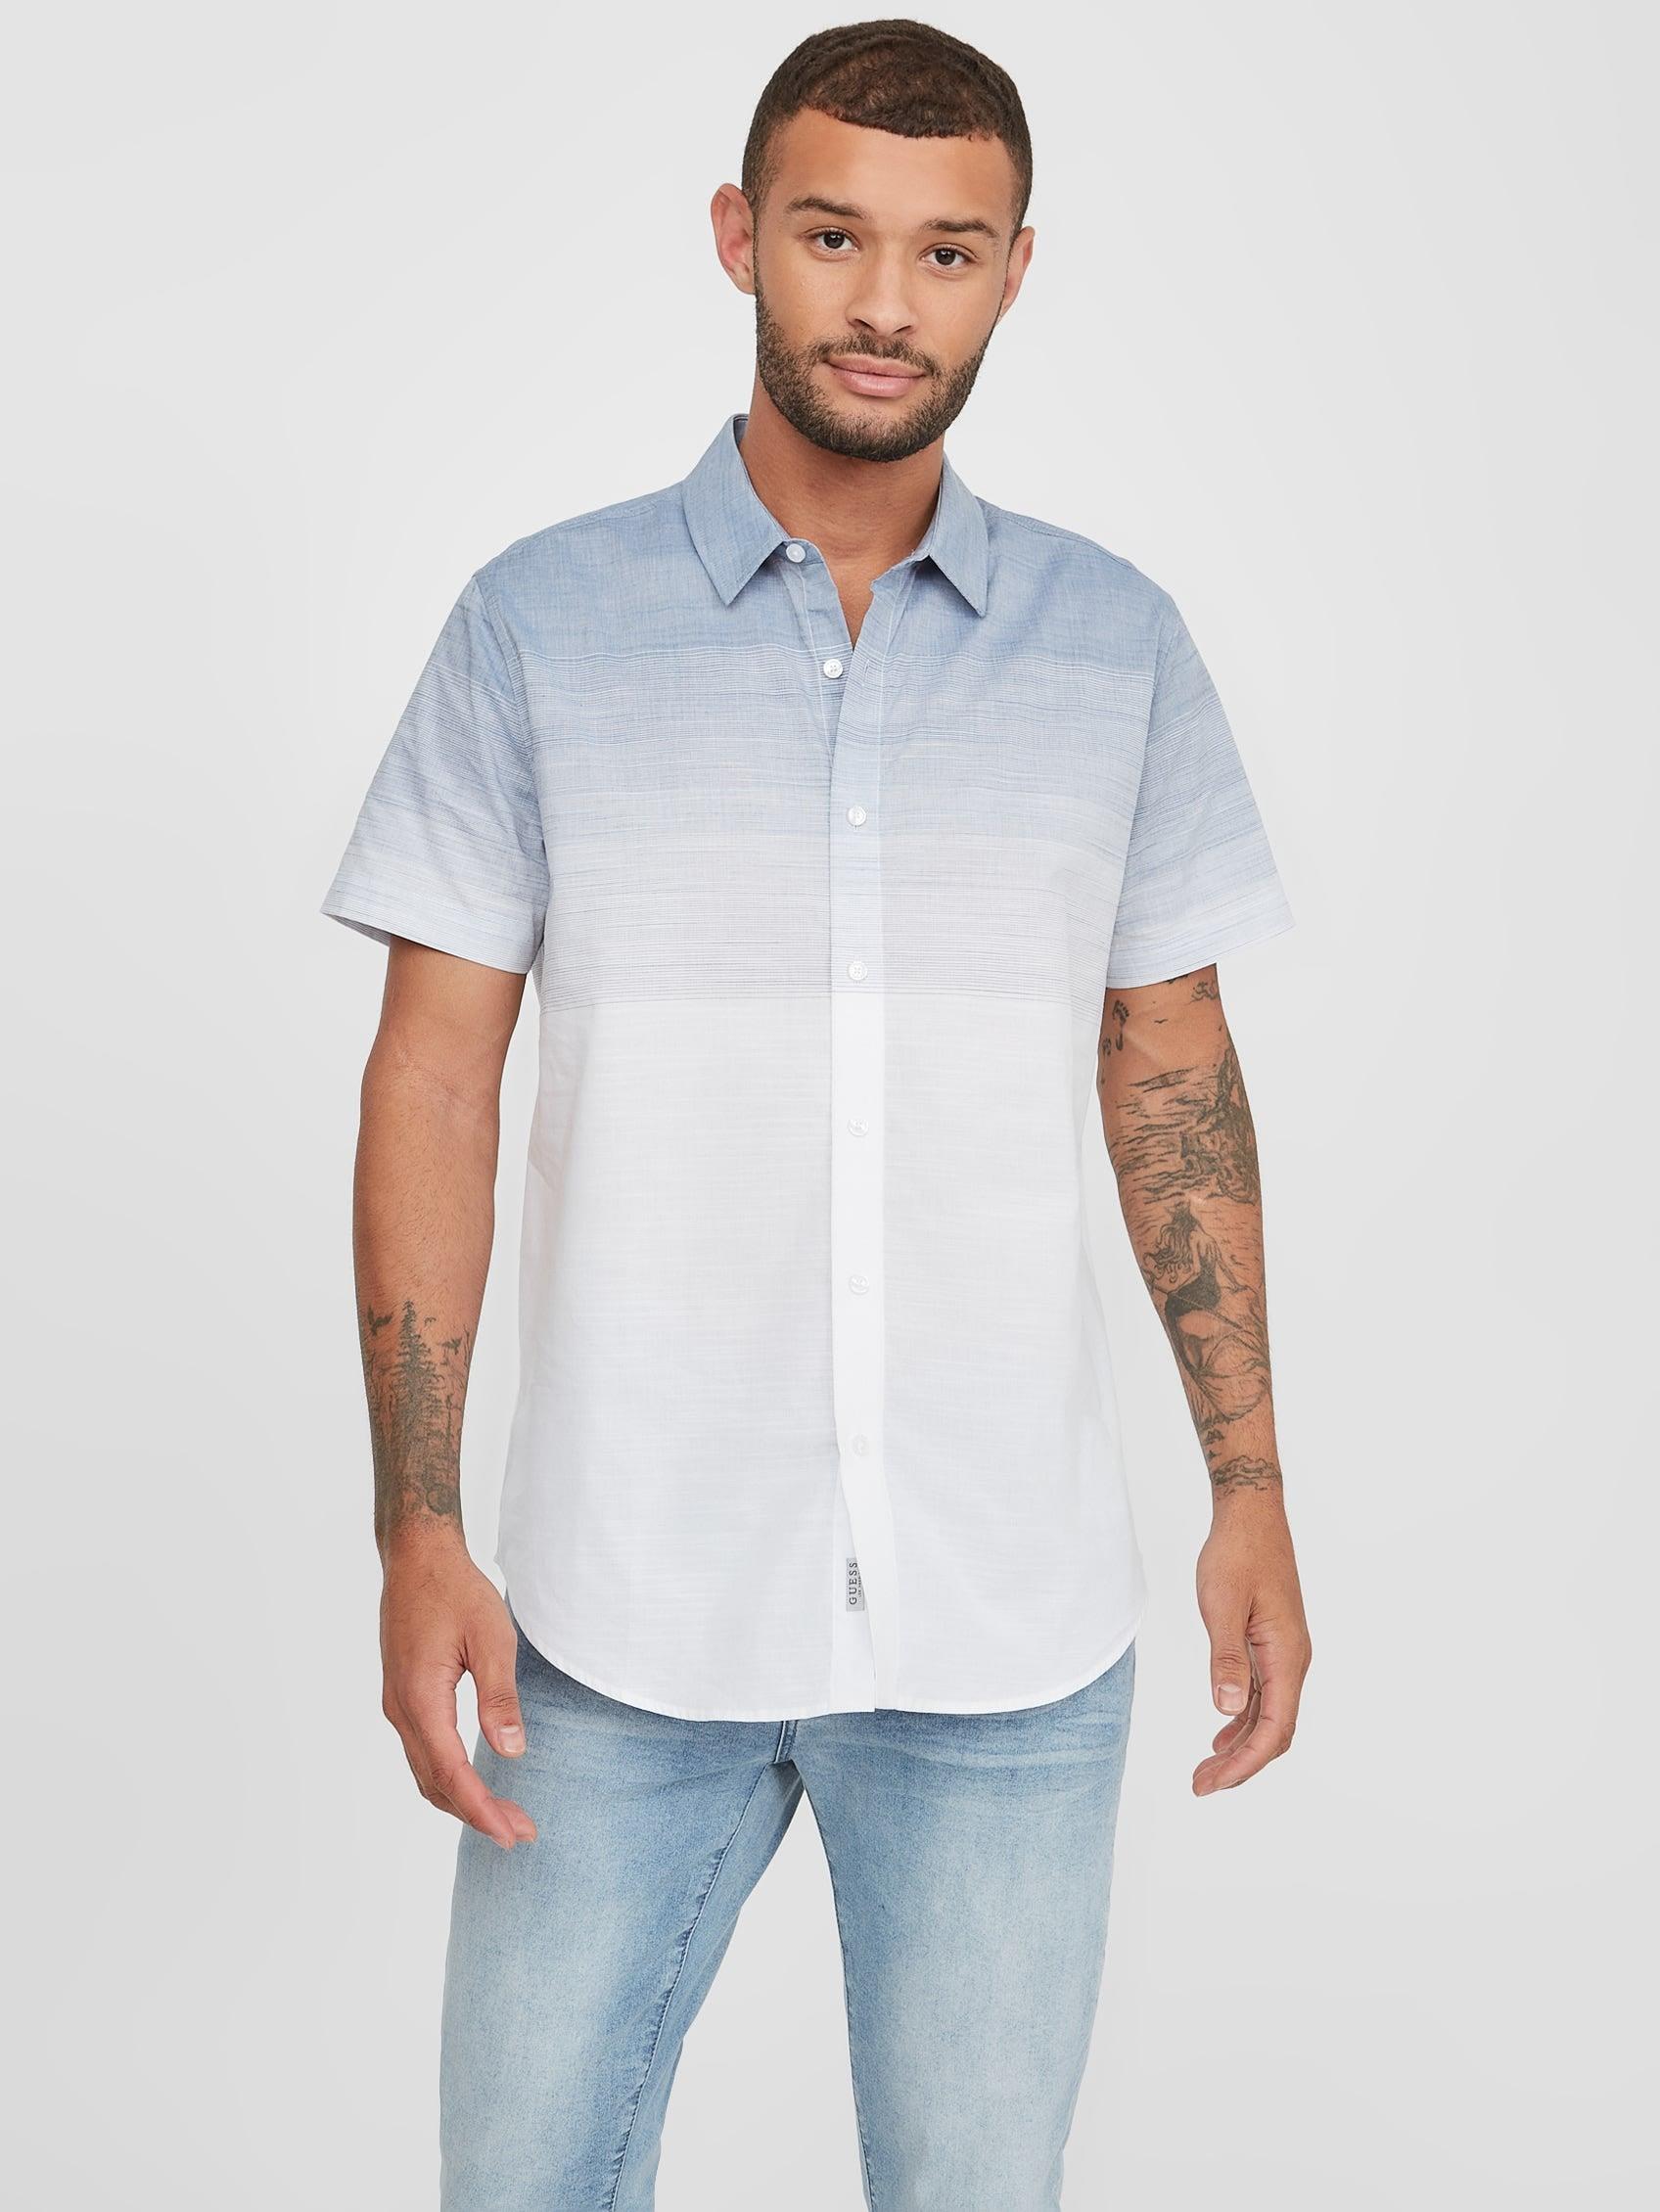 Guess Factory Qino Ombre Shirt in Blue for Men | Lyst